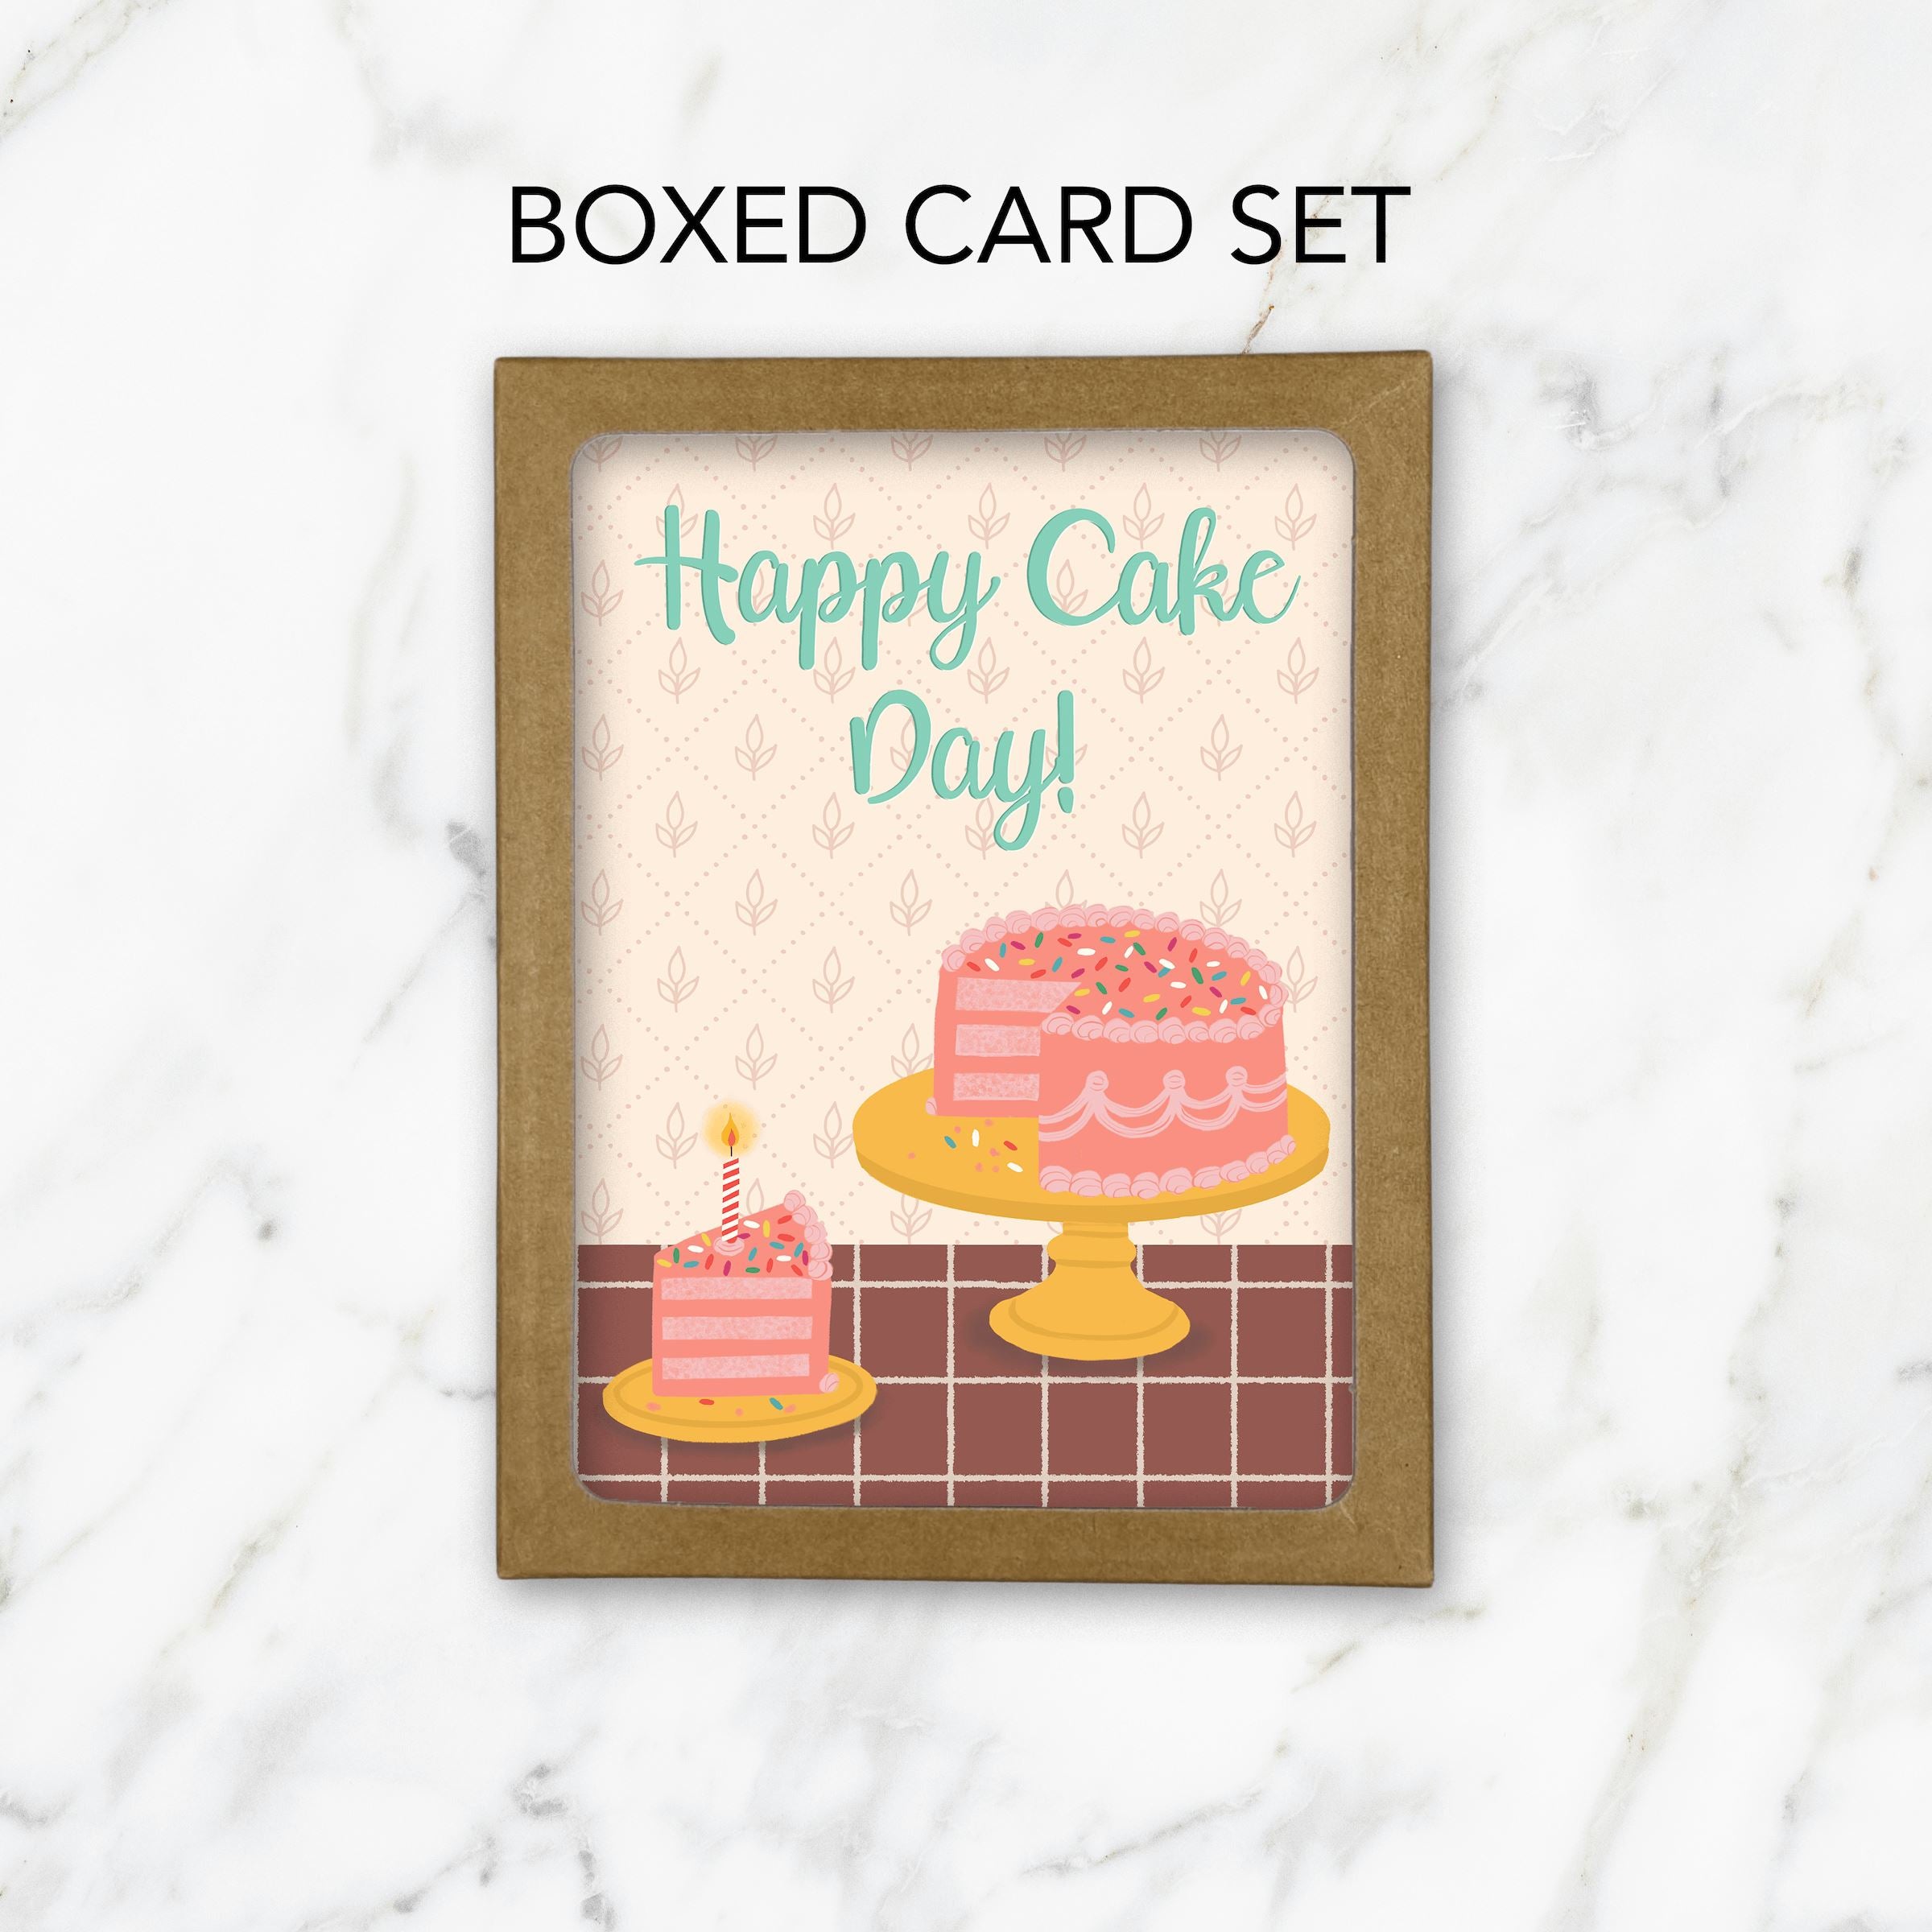 Happy Cake Day Birthday Greeting Card Greeting Cards Lucid Moon Studio Set of 6 Cards 